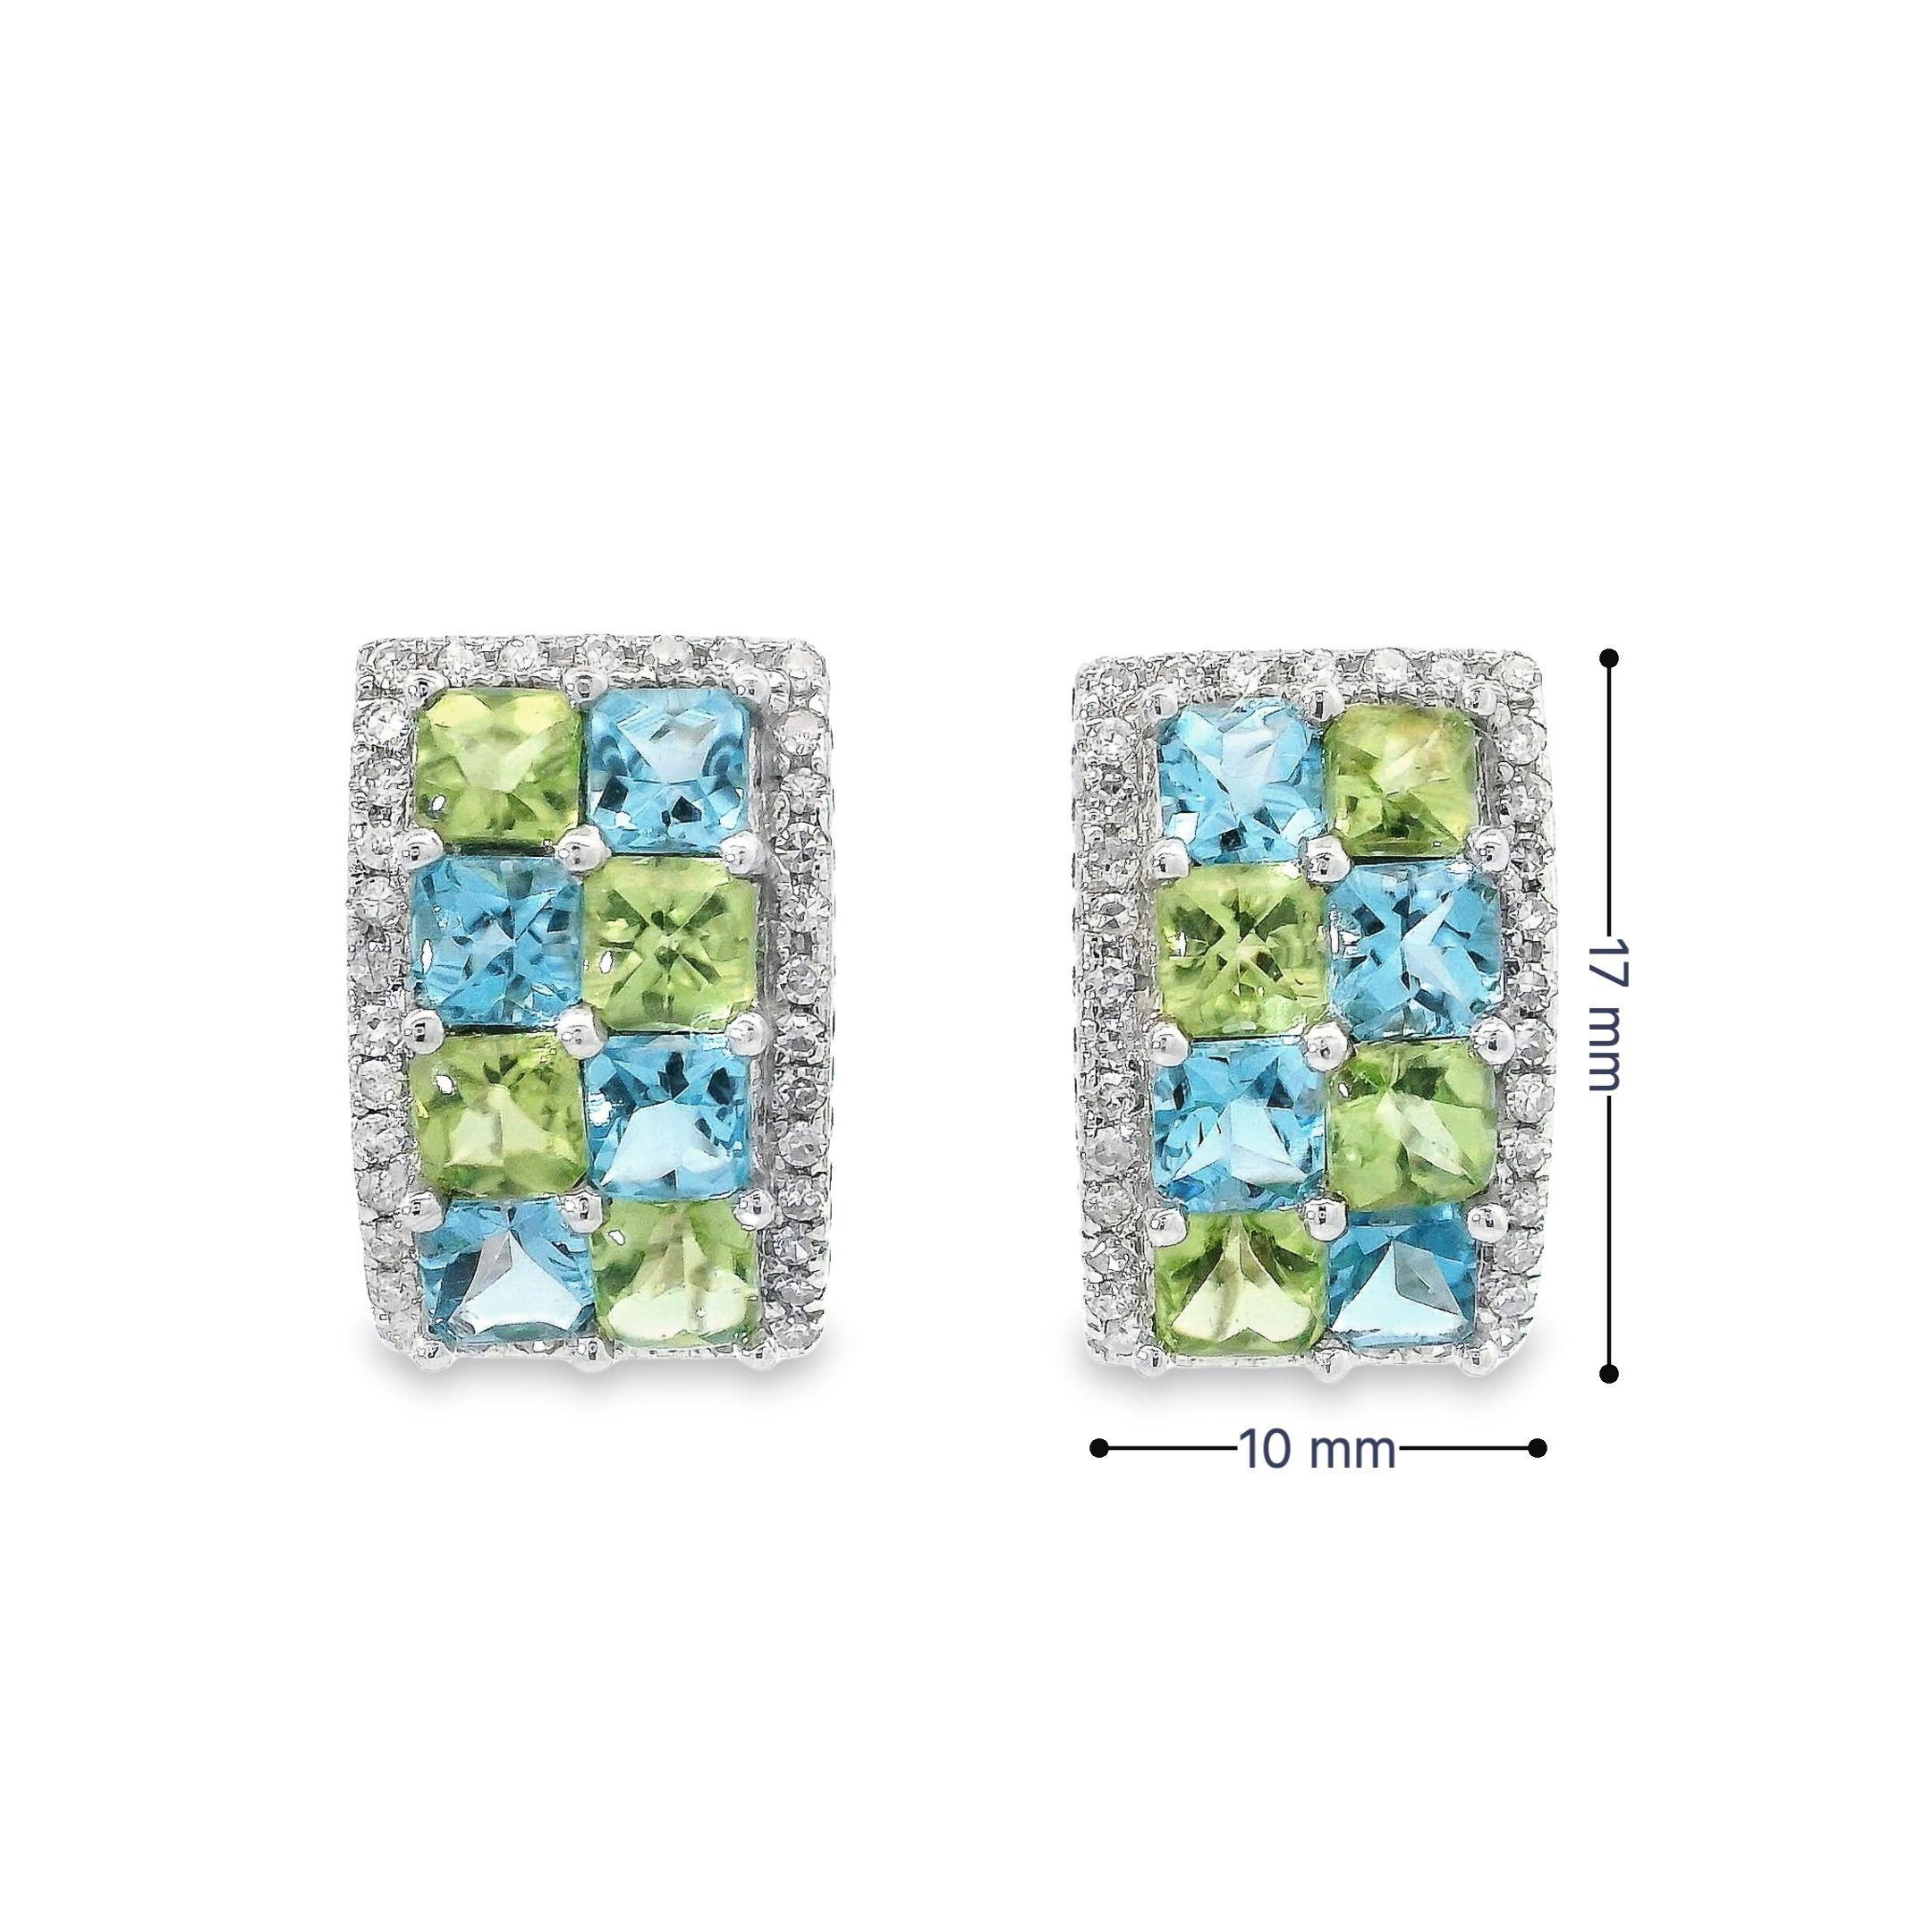 Cabochon Mosaic Peridot and Blue Topaz Ring and Earrings in 18K White Gold with Diamonds